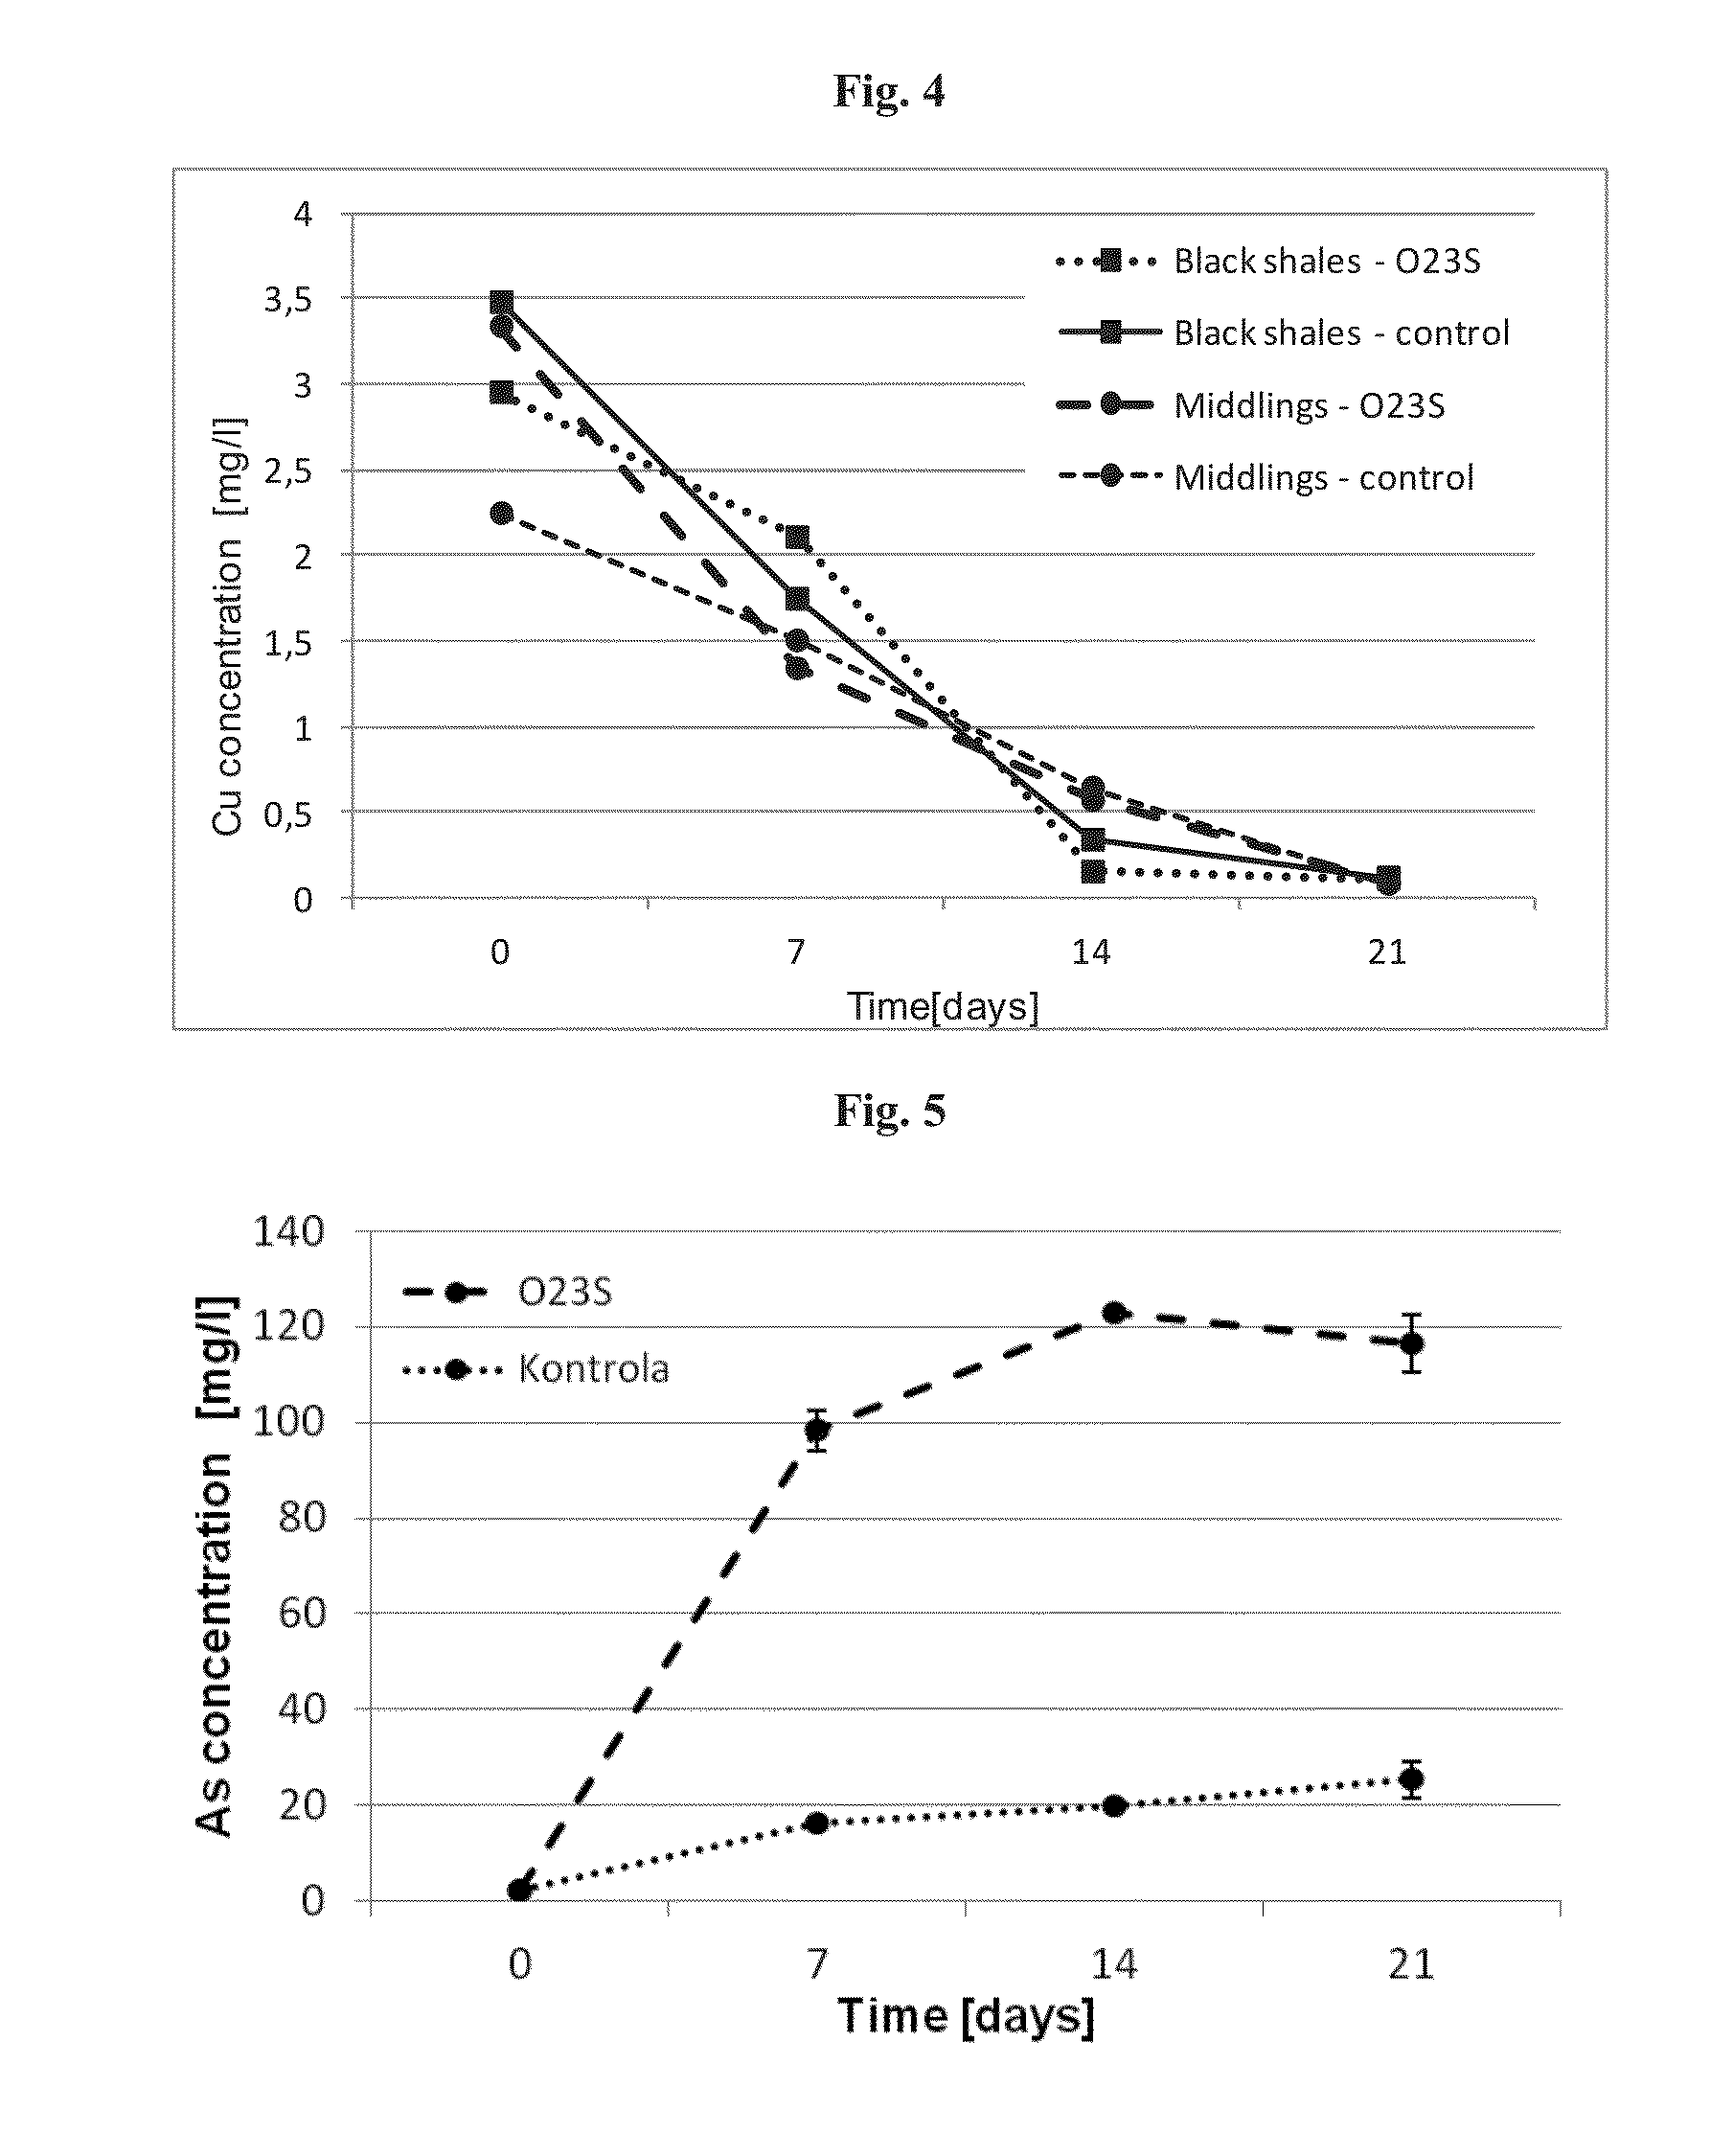 Removal of arsenic using a dissimilatory arsenic reductase